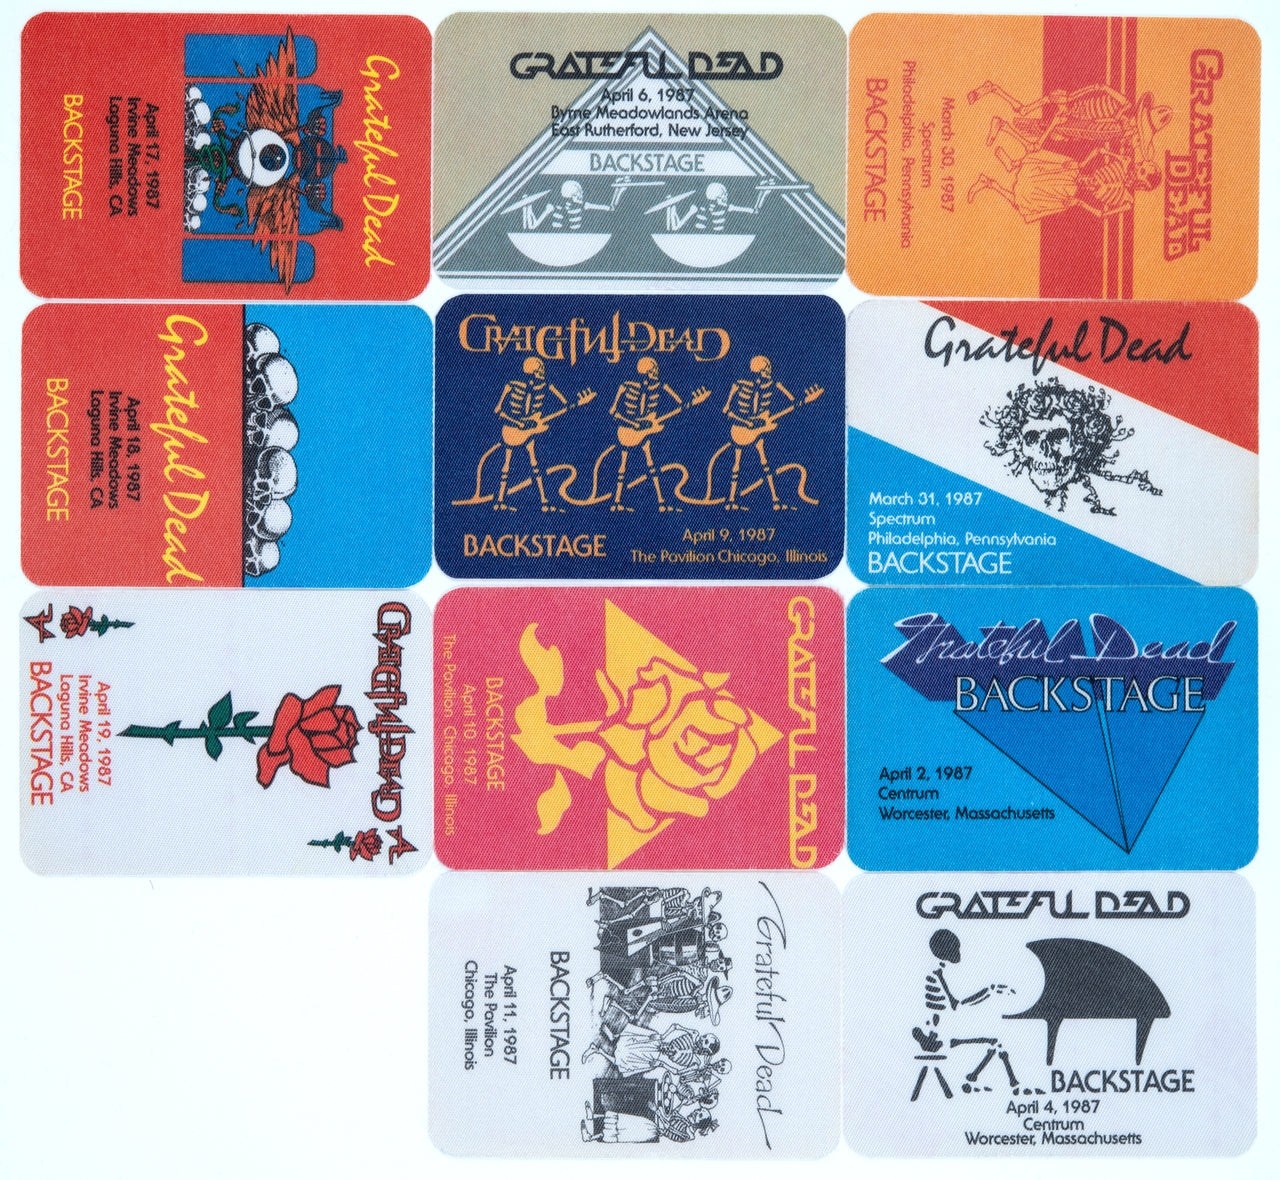 Grateful Dead Backstage Passes (3/30/1987 - 4/19/1987) from Dan Healy